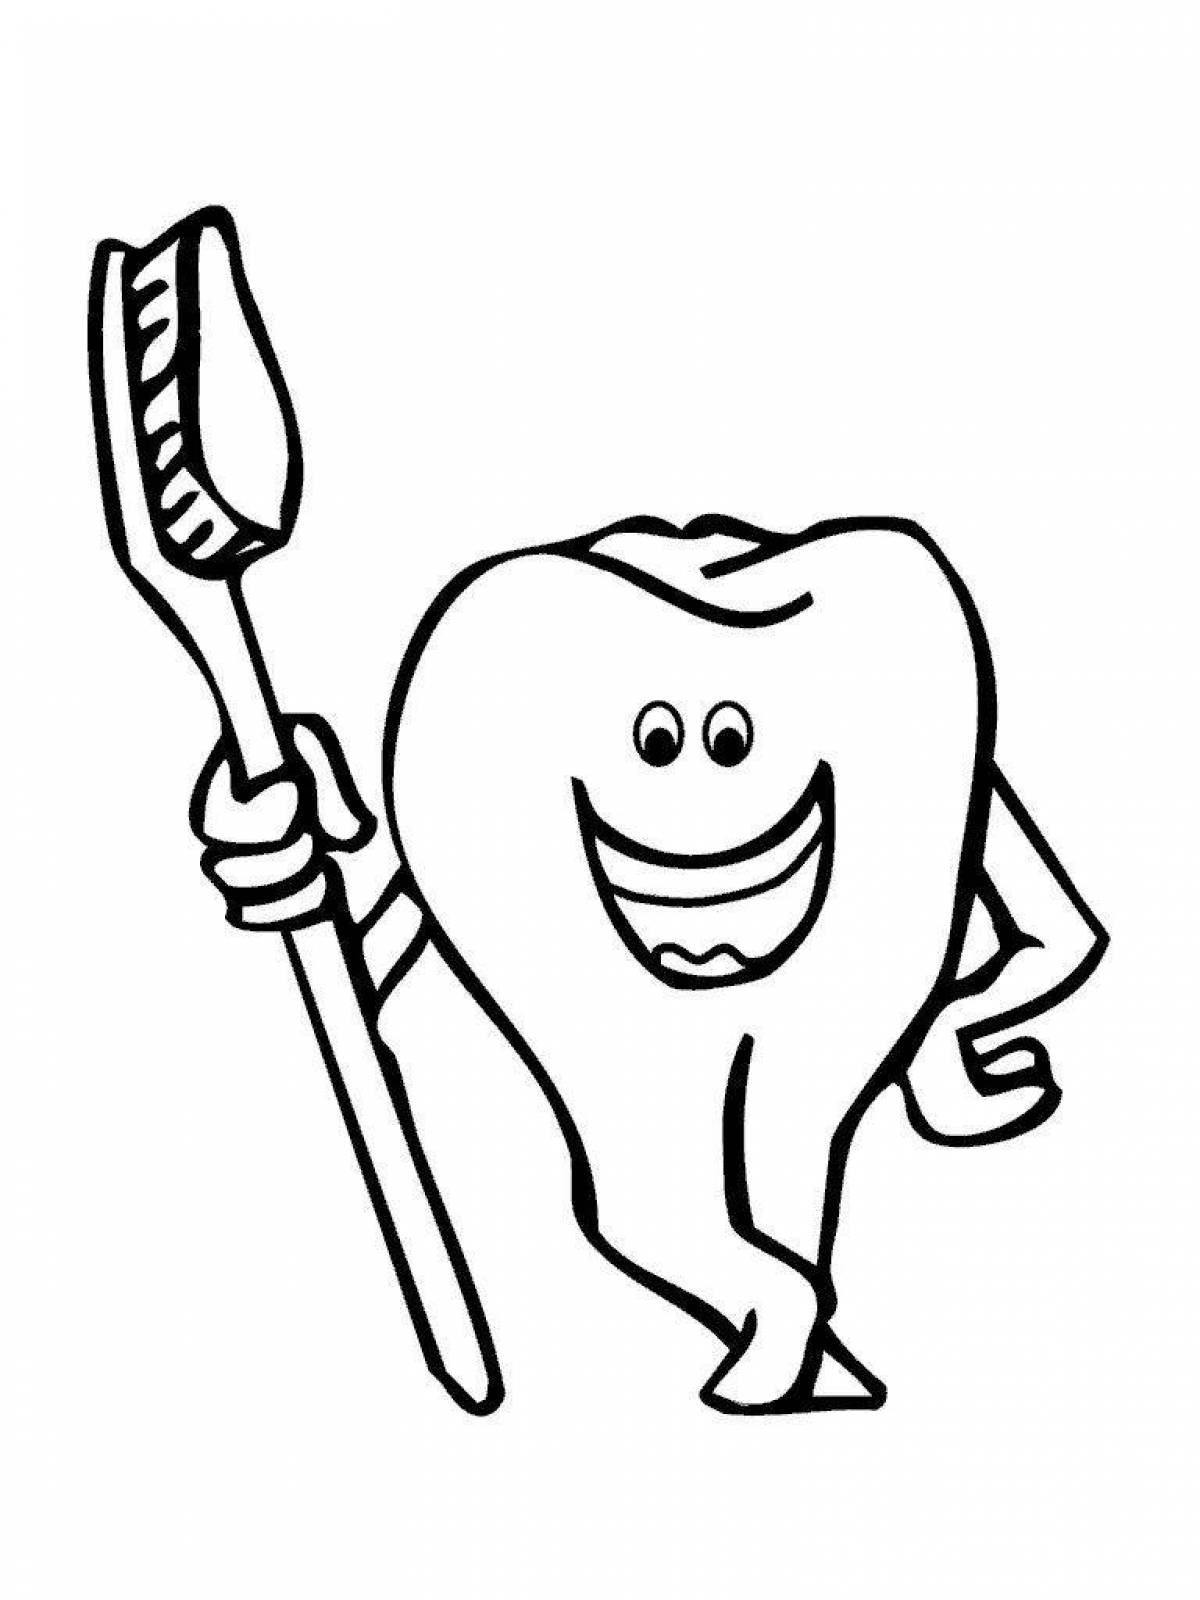 Animated baby teeth coloring page